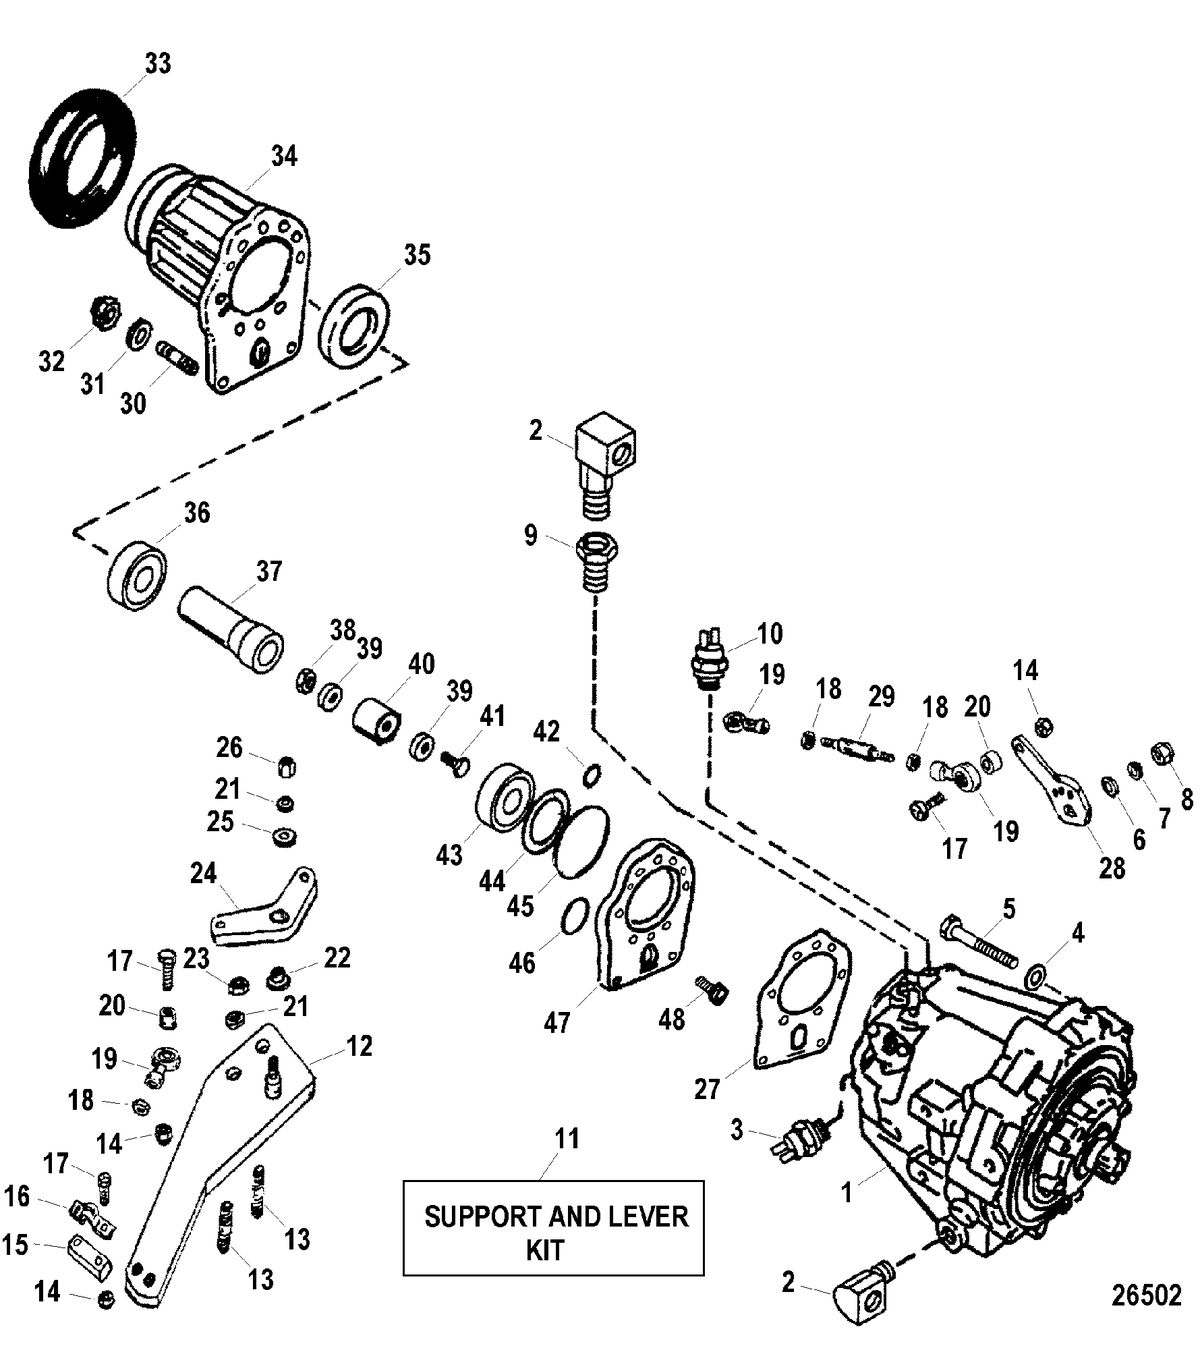 RACE STERNDRIVE 900 SC Transmission And Components(Plug In)